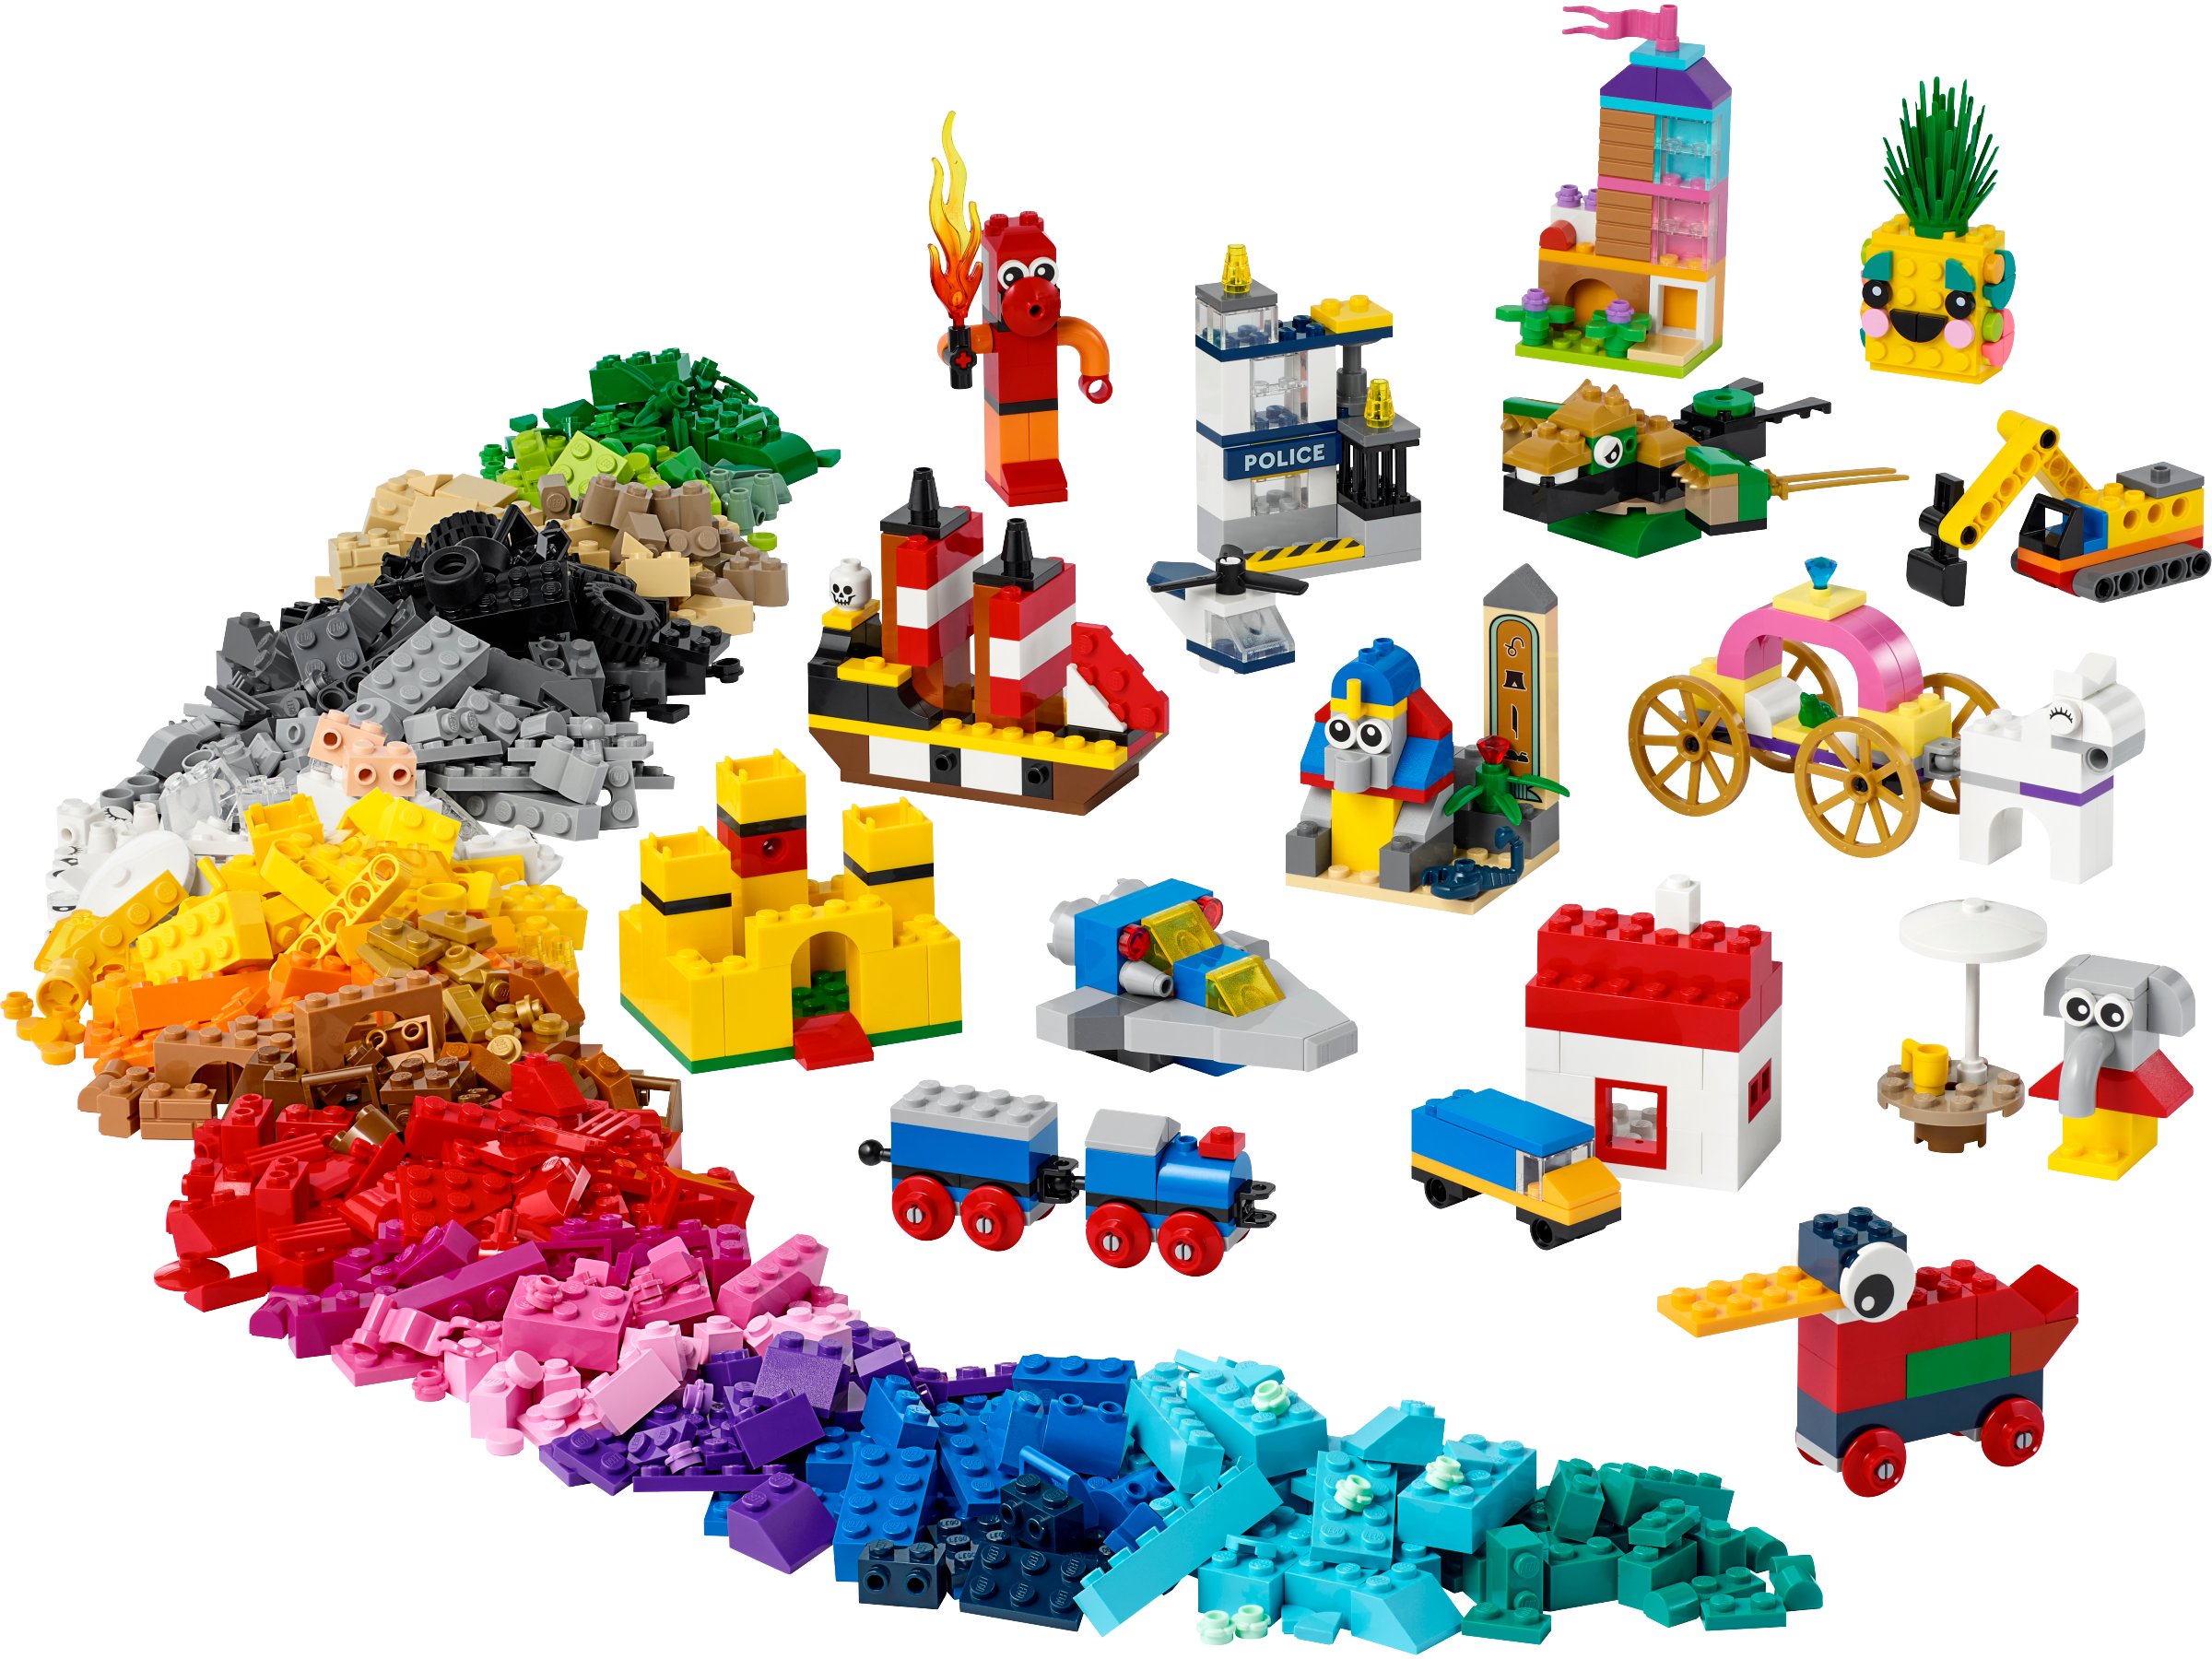 90 Years of Play 11021 | Classic | Buy online the Official LEGO® US